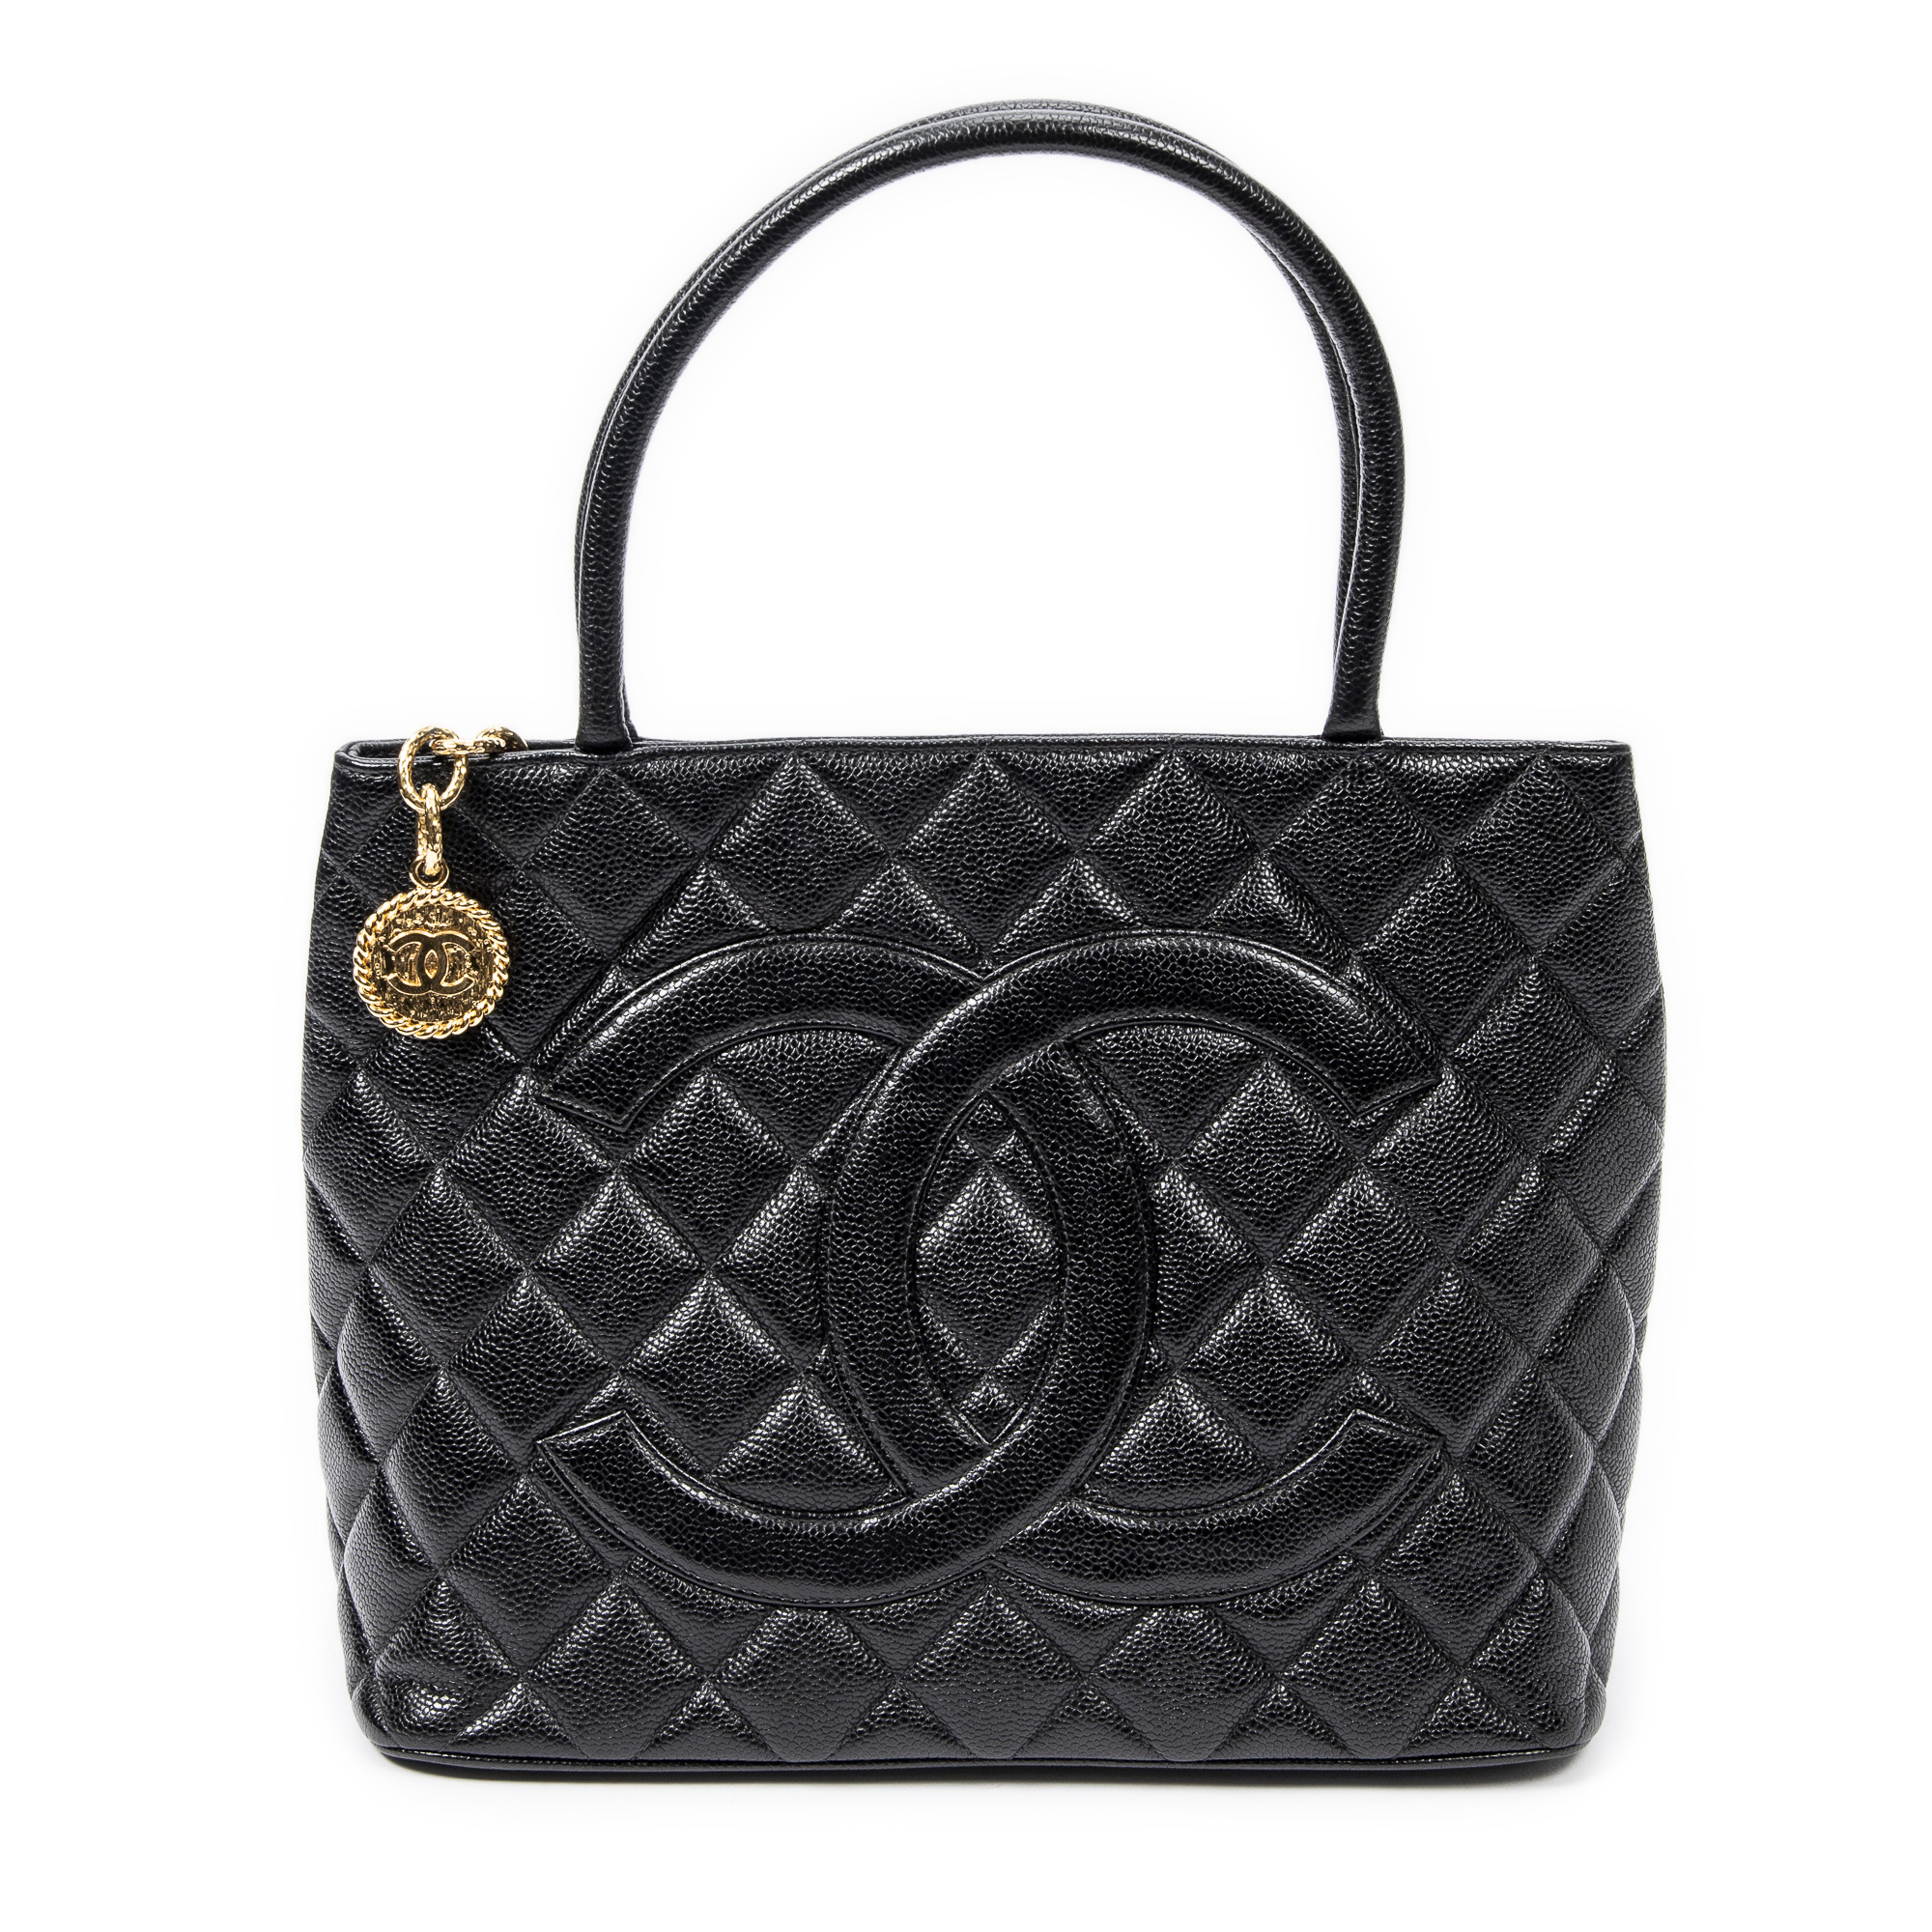 CHANEL Black Quilted Caviar Leather Medallion Tote Bag